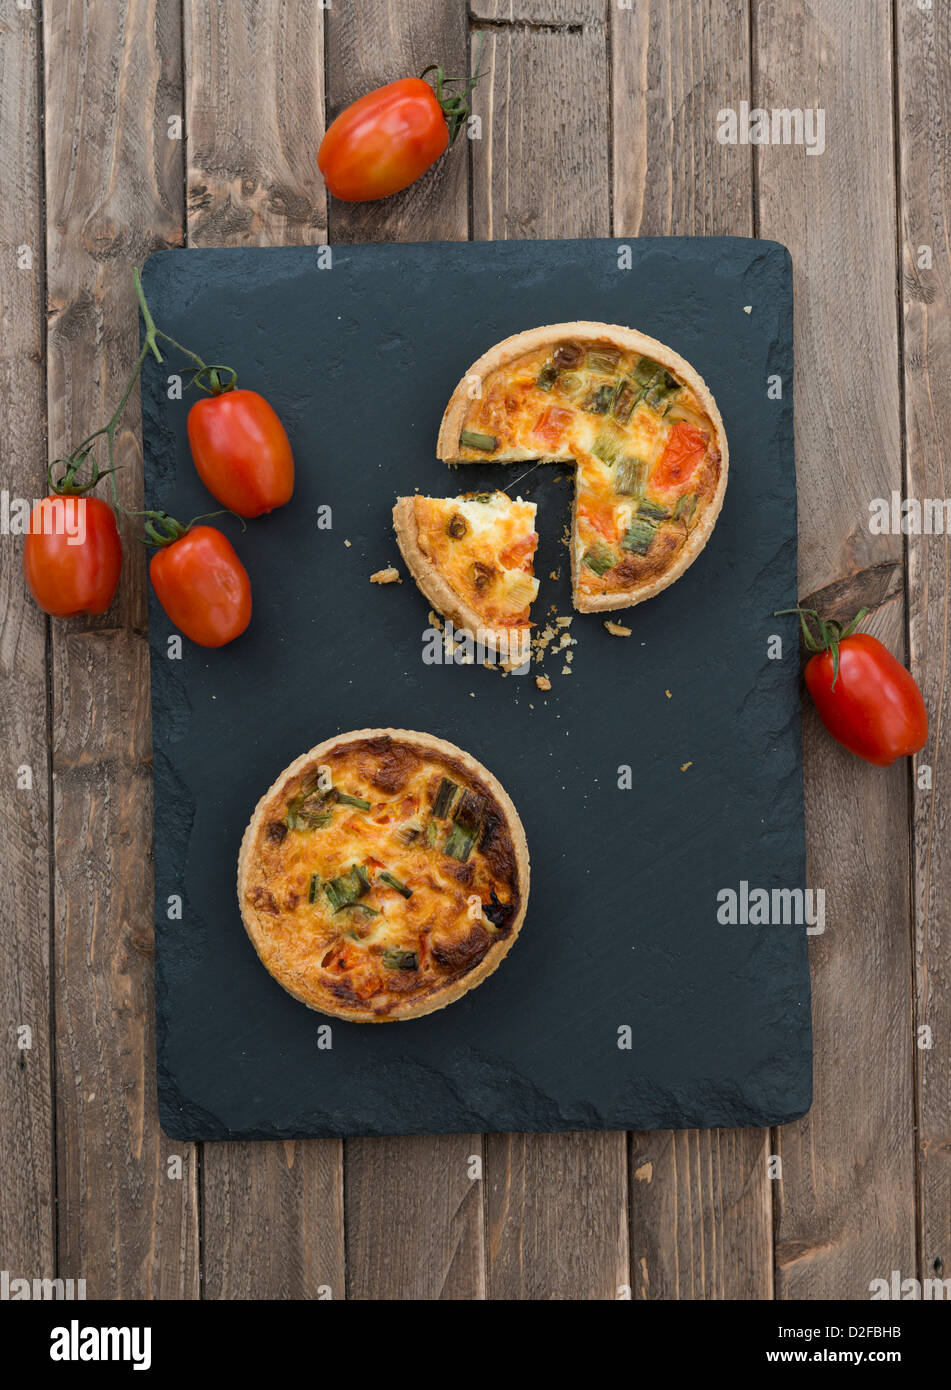 Cooked cheese, spring onion and tomato quiche, on a slate board, garnished with tomatoes. Stock Photo